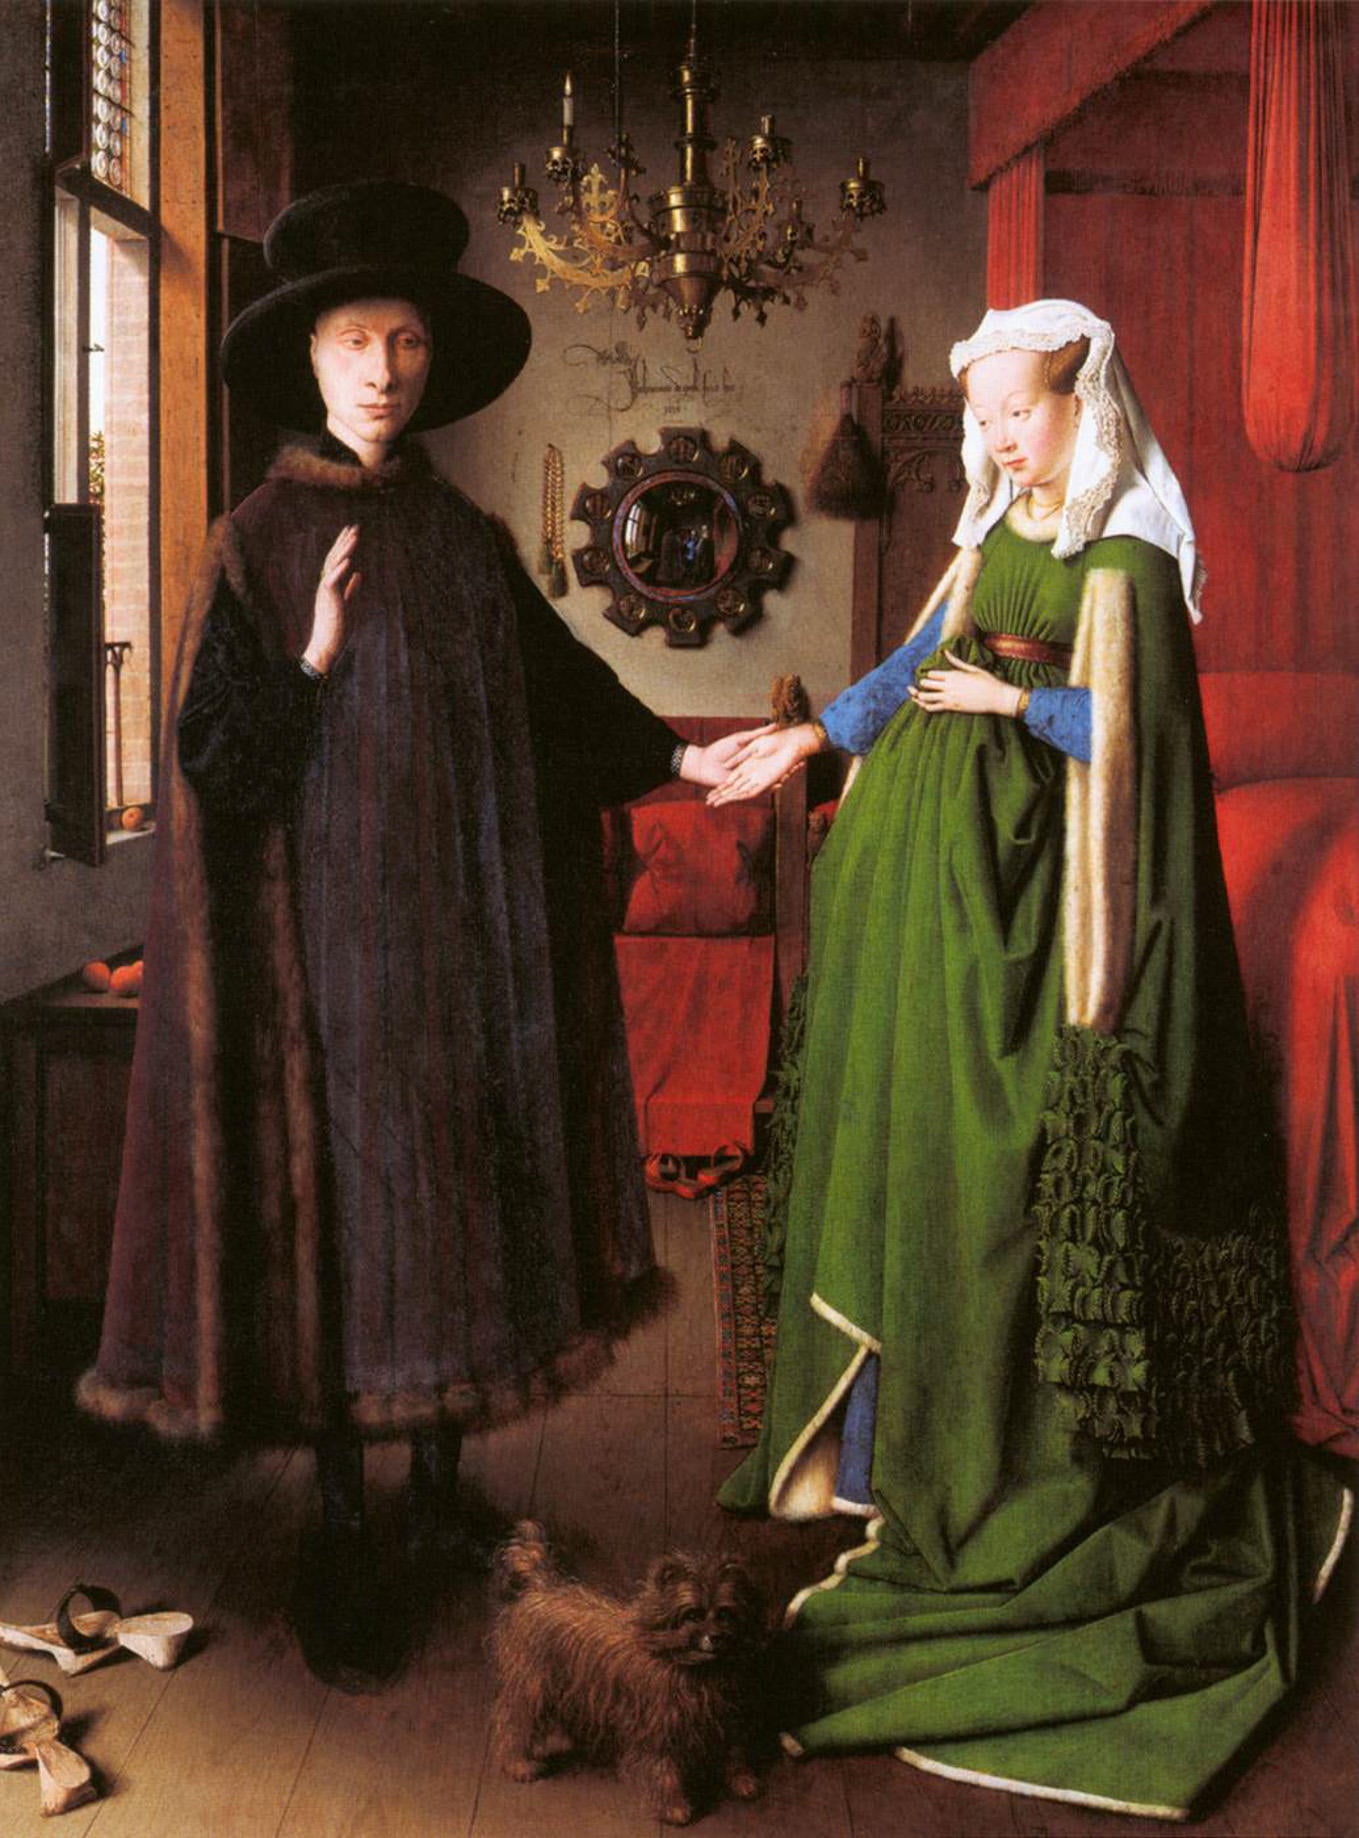 Portrait of Giovanni Arnolfini And His Wife by Jan van Eyck, painted in 1434 (Alamy/PA)